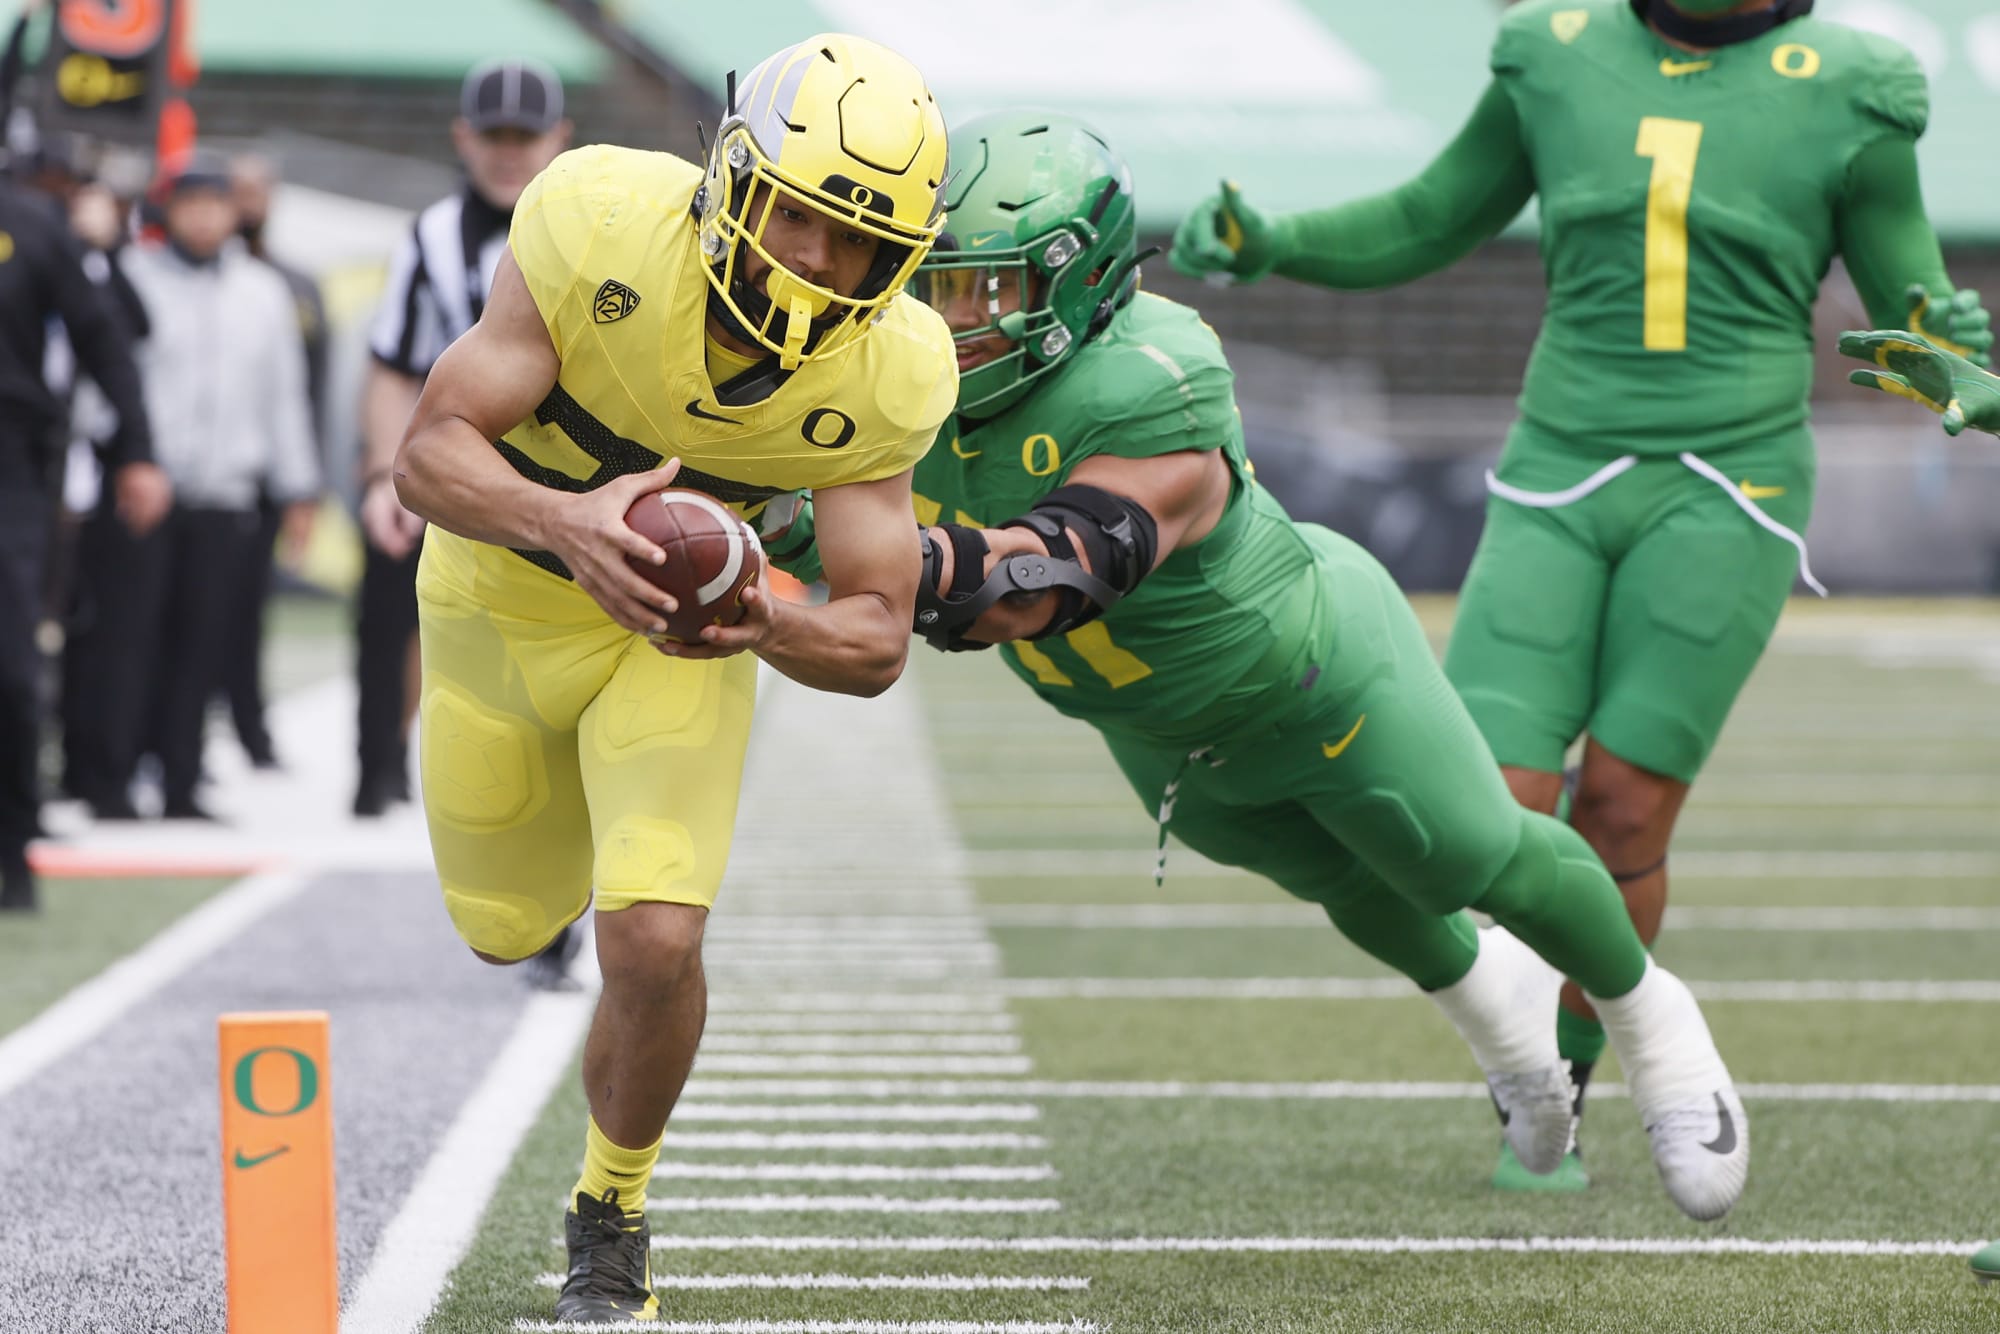 Oregon Football: What can we expect from Travis Dye in 2021?